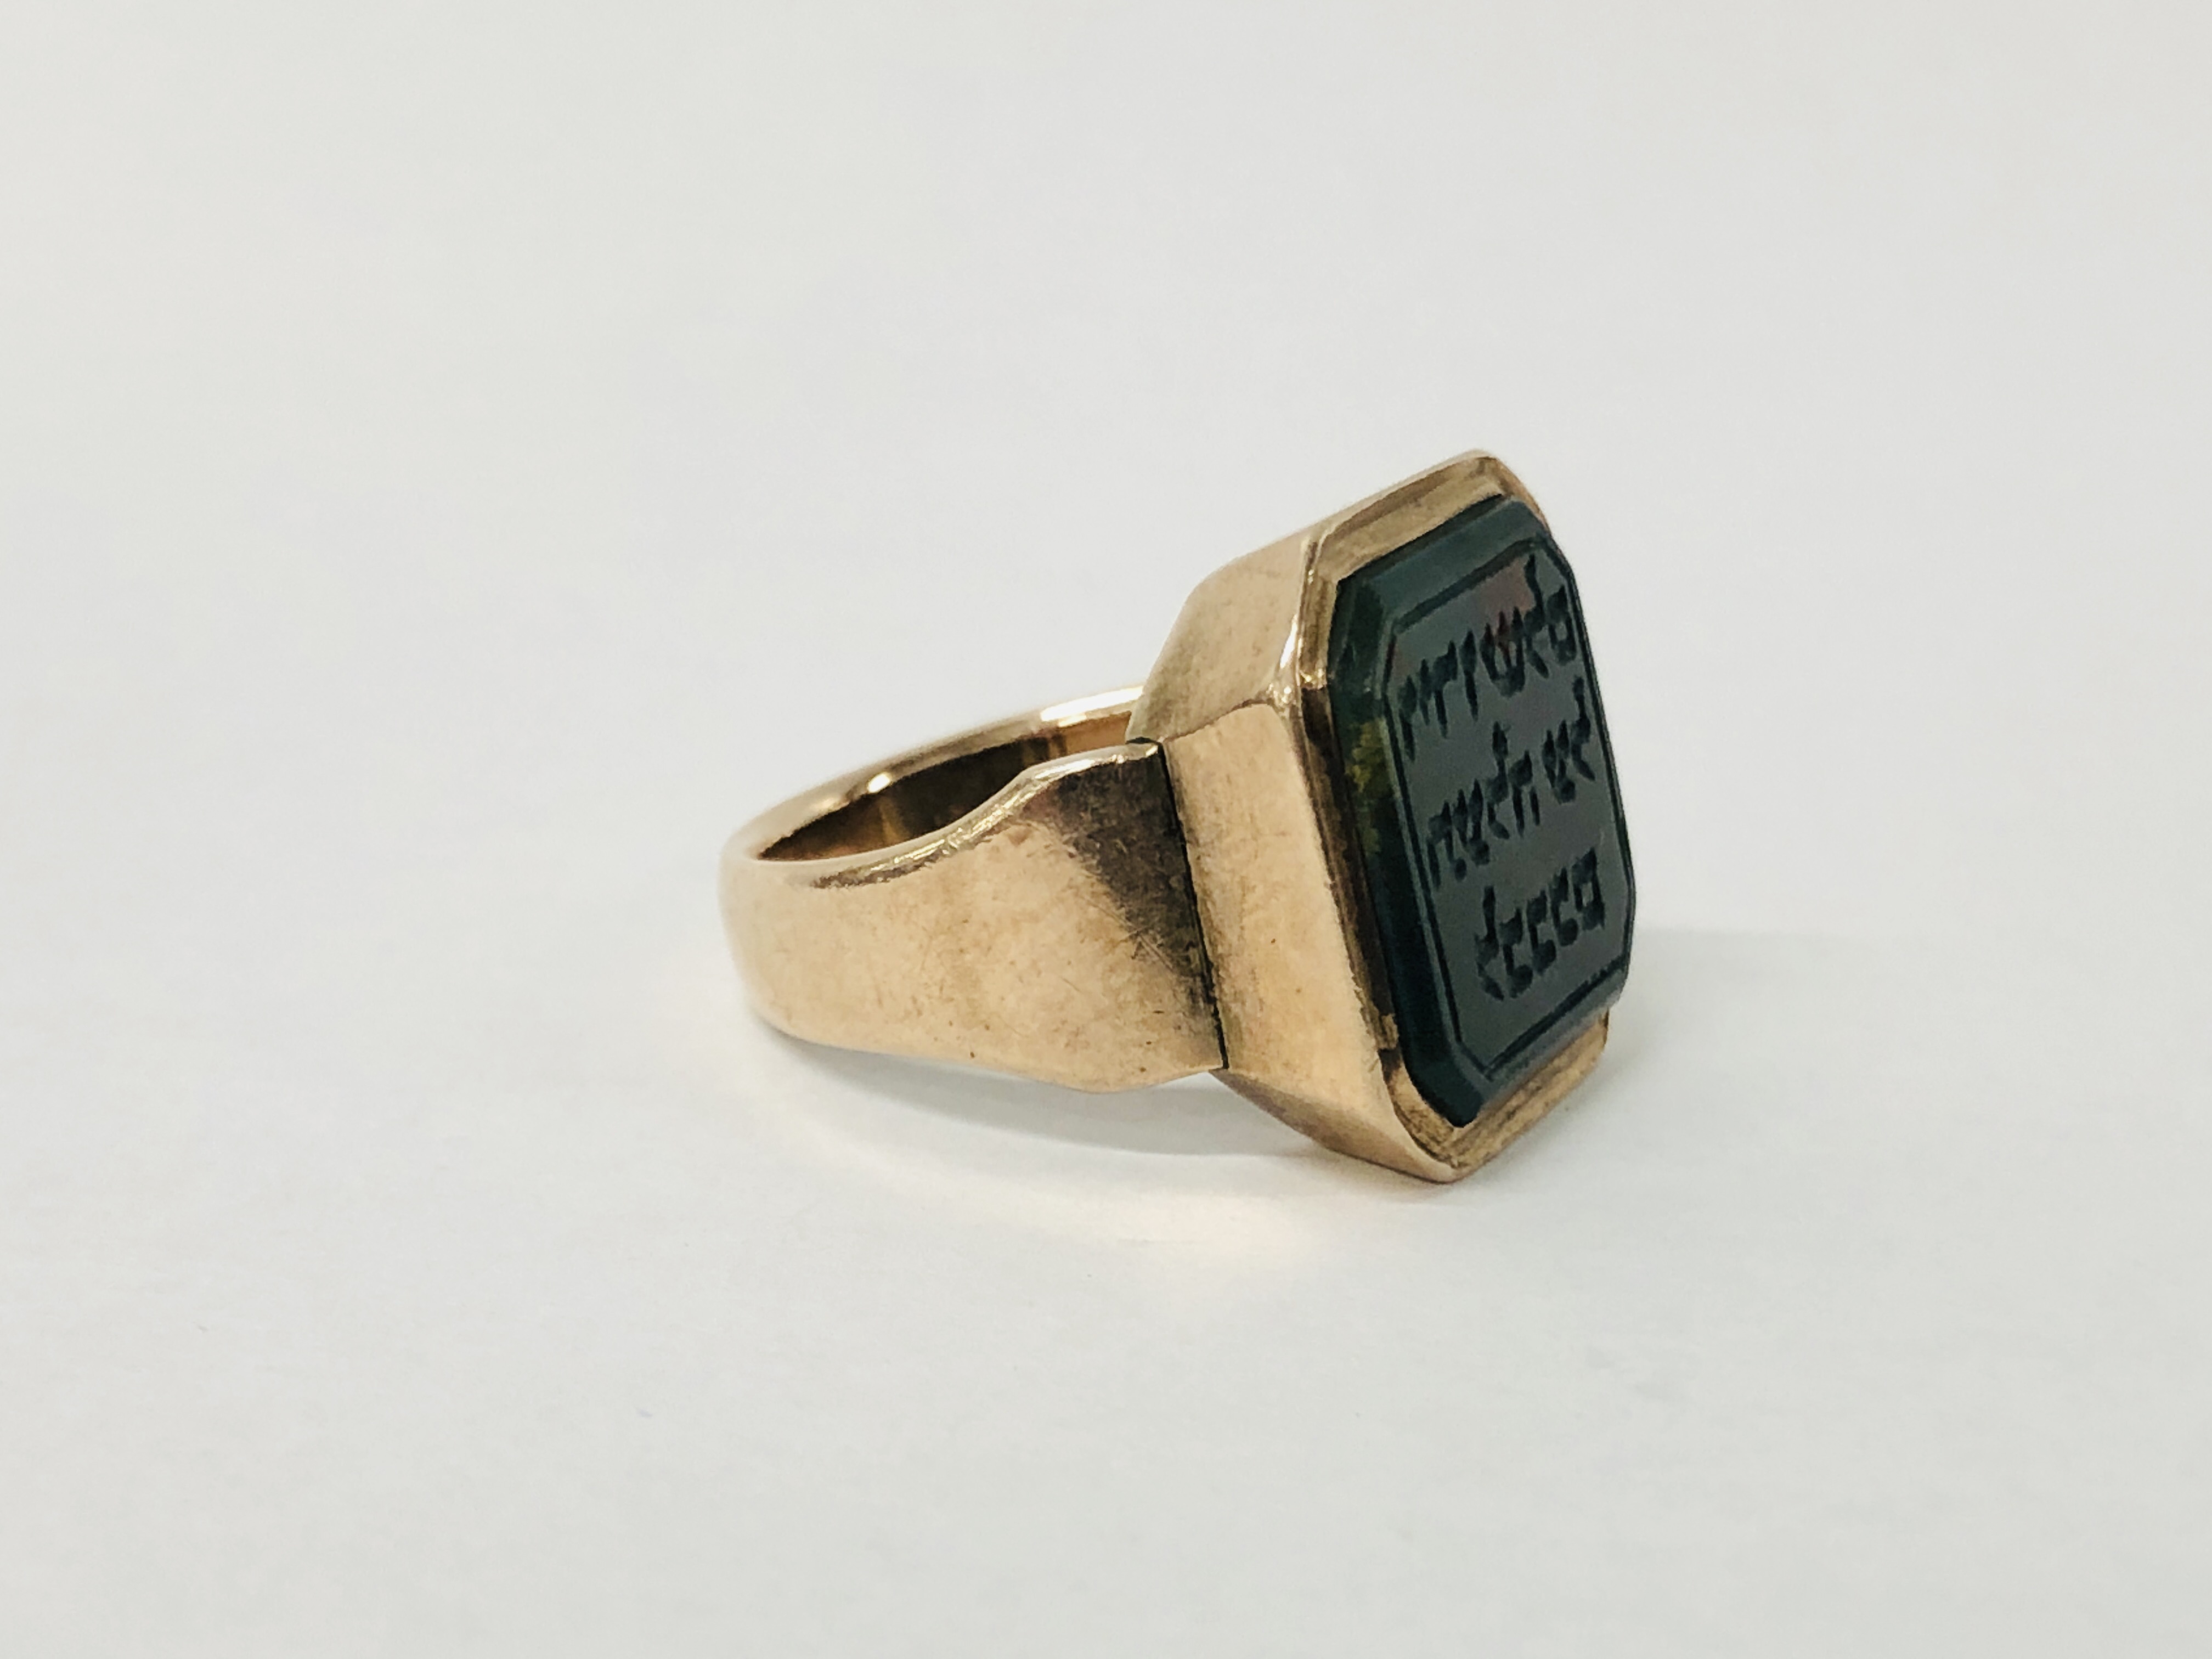 A YELLOW METAL RING & BLOODSTONE SIGNET RING INSCRIBED WITH HEBREW TEXT - SIZE M / N - Image 2 of 6